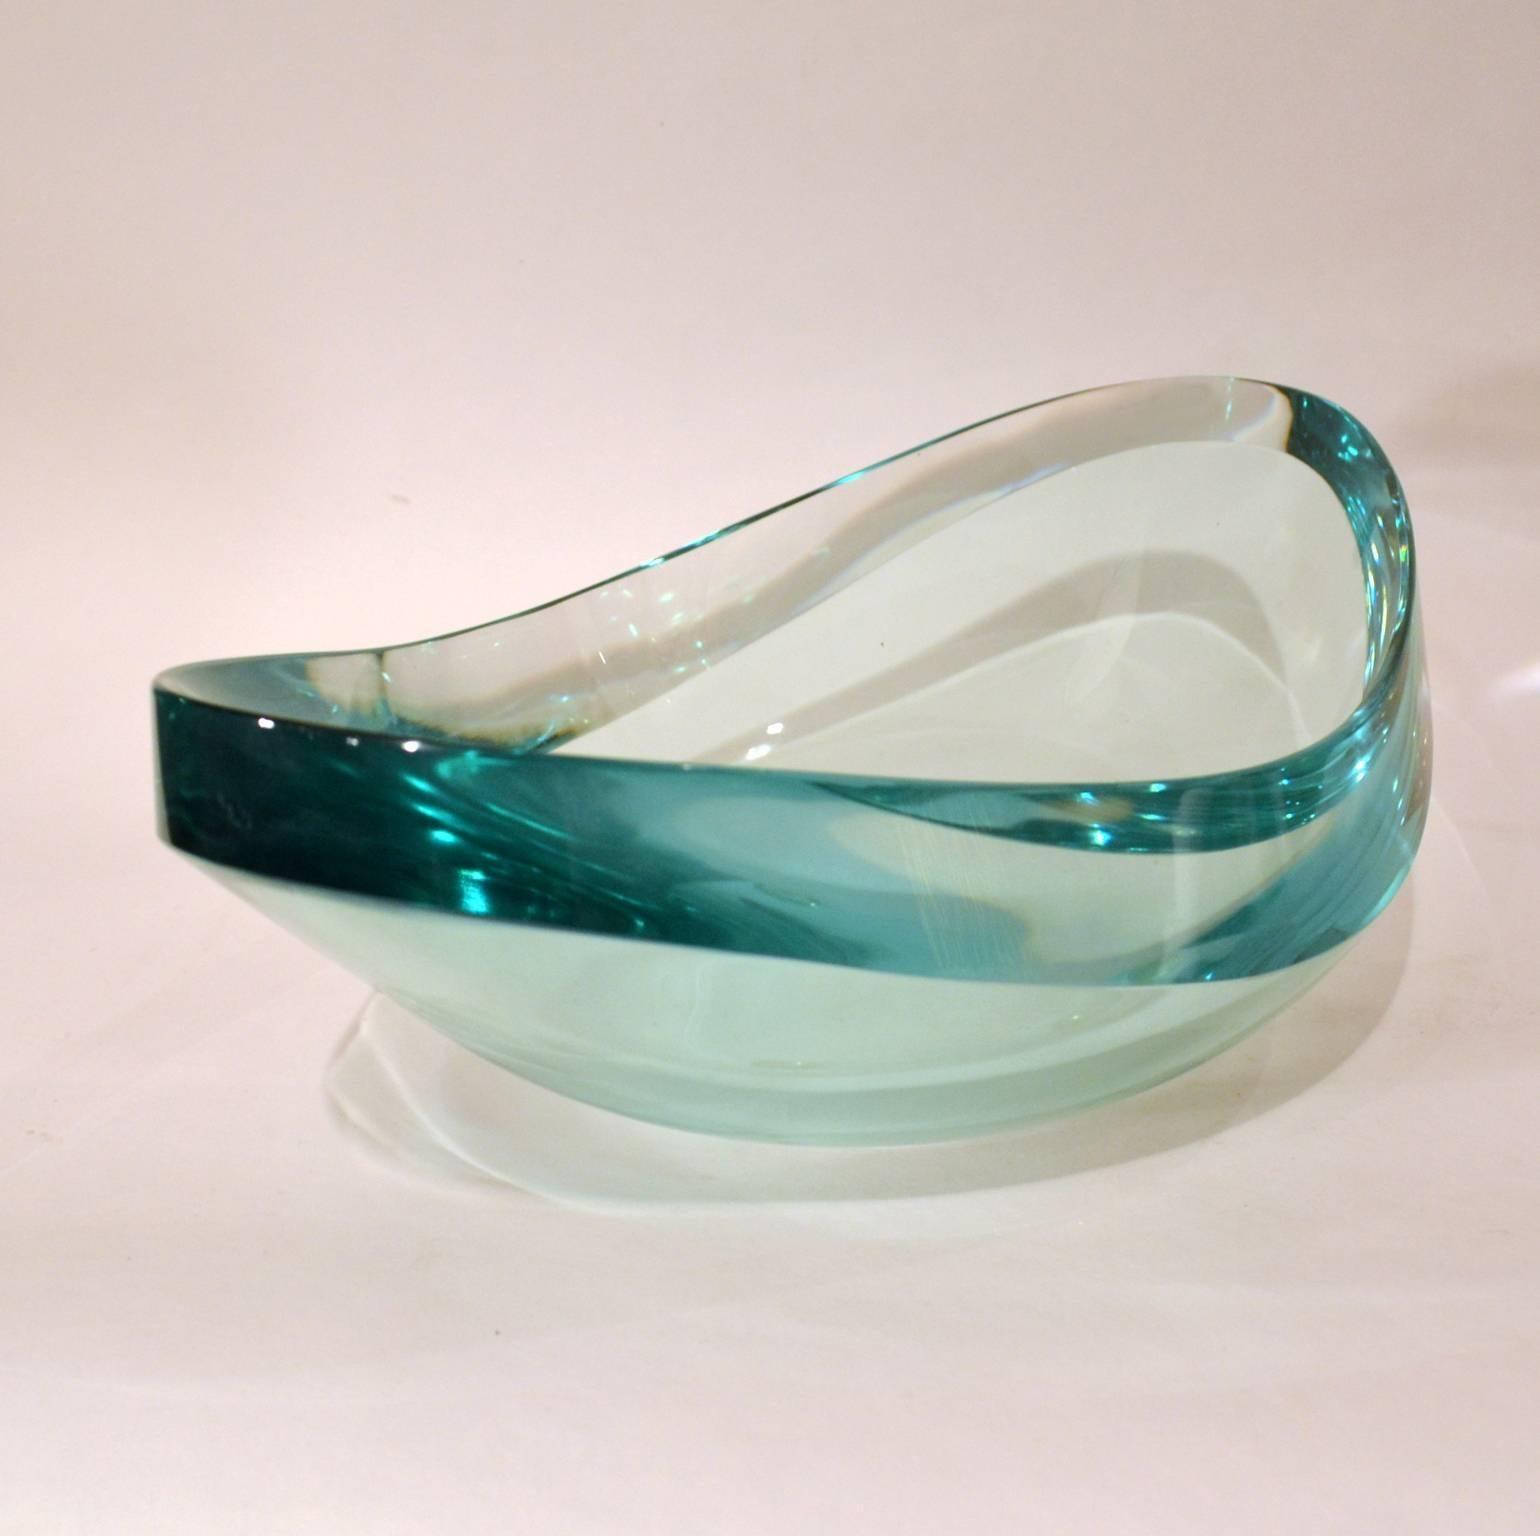 Exceptional large oval crystal glass bowl with a flat polished edge in the typical green reflecting clear glass, the signature of Fontana Arte, Italy 1960s. Made by the Murano glass masters Erwin Burger and signed EB. The bowl has a wonderful